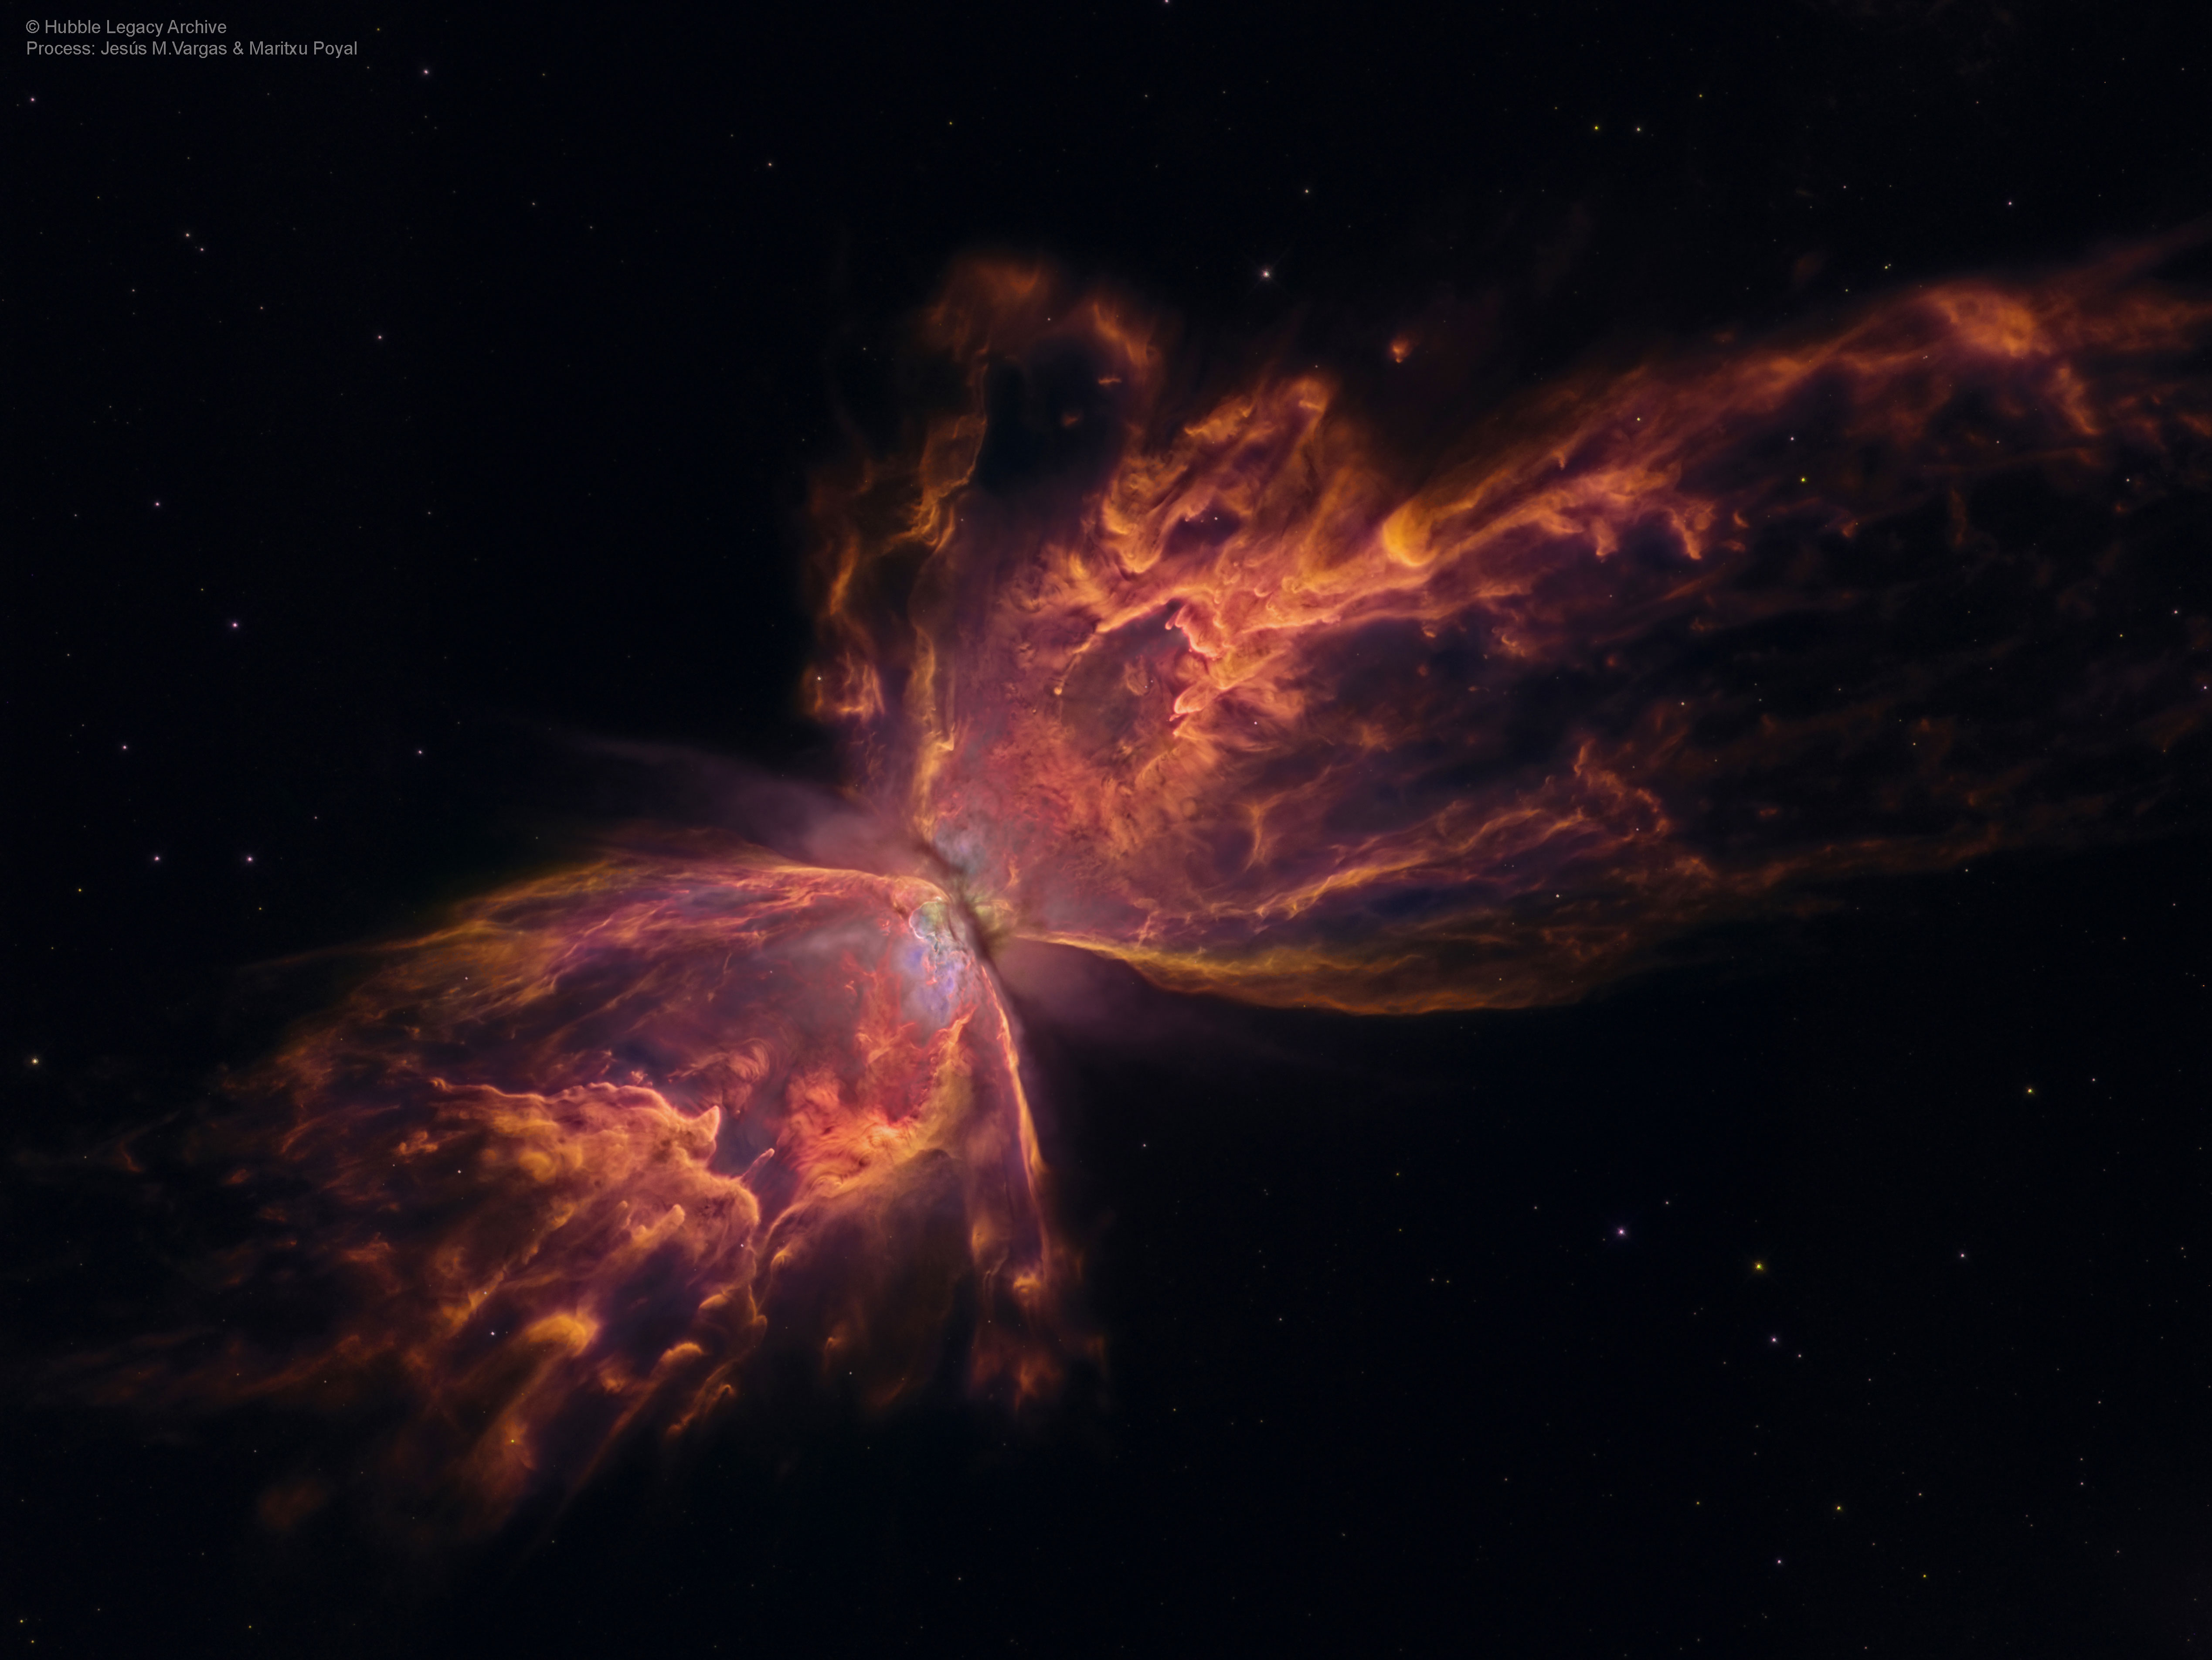 Astronomy Picture of the Day - Σελίδα 3 Butterfly_HubbleVargas_5075